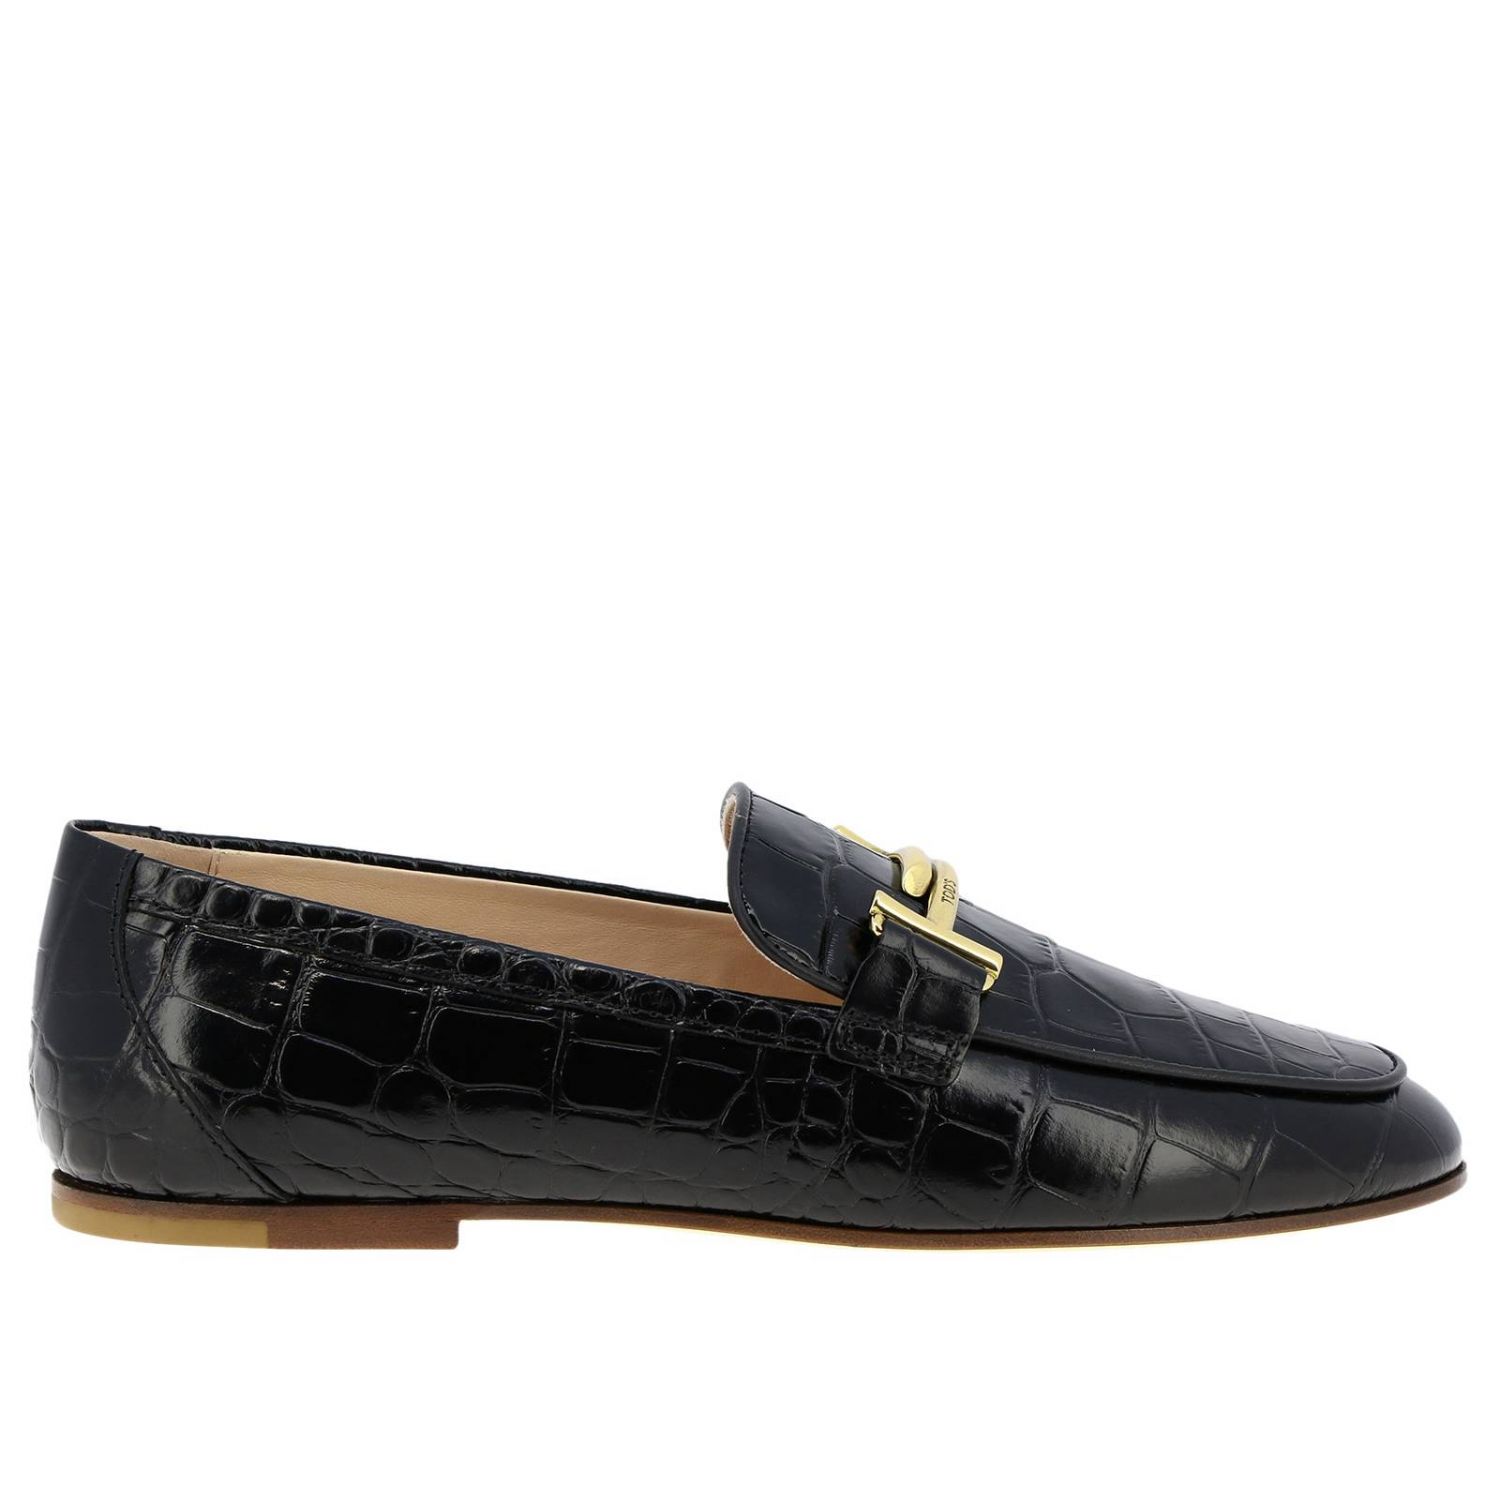 tod's double t loafer womens